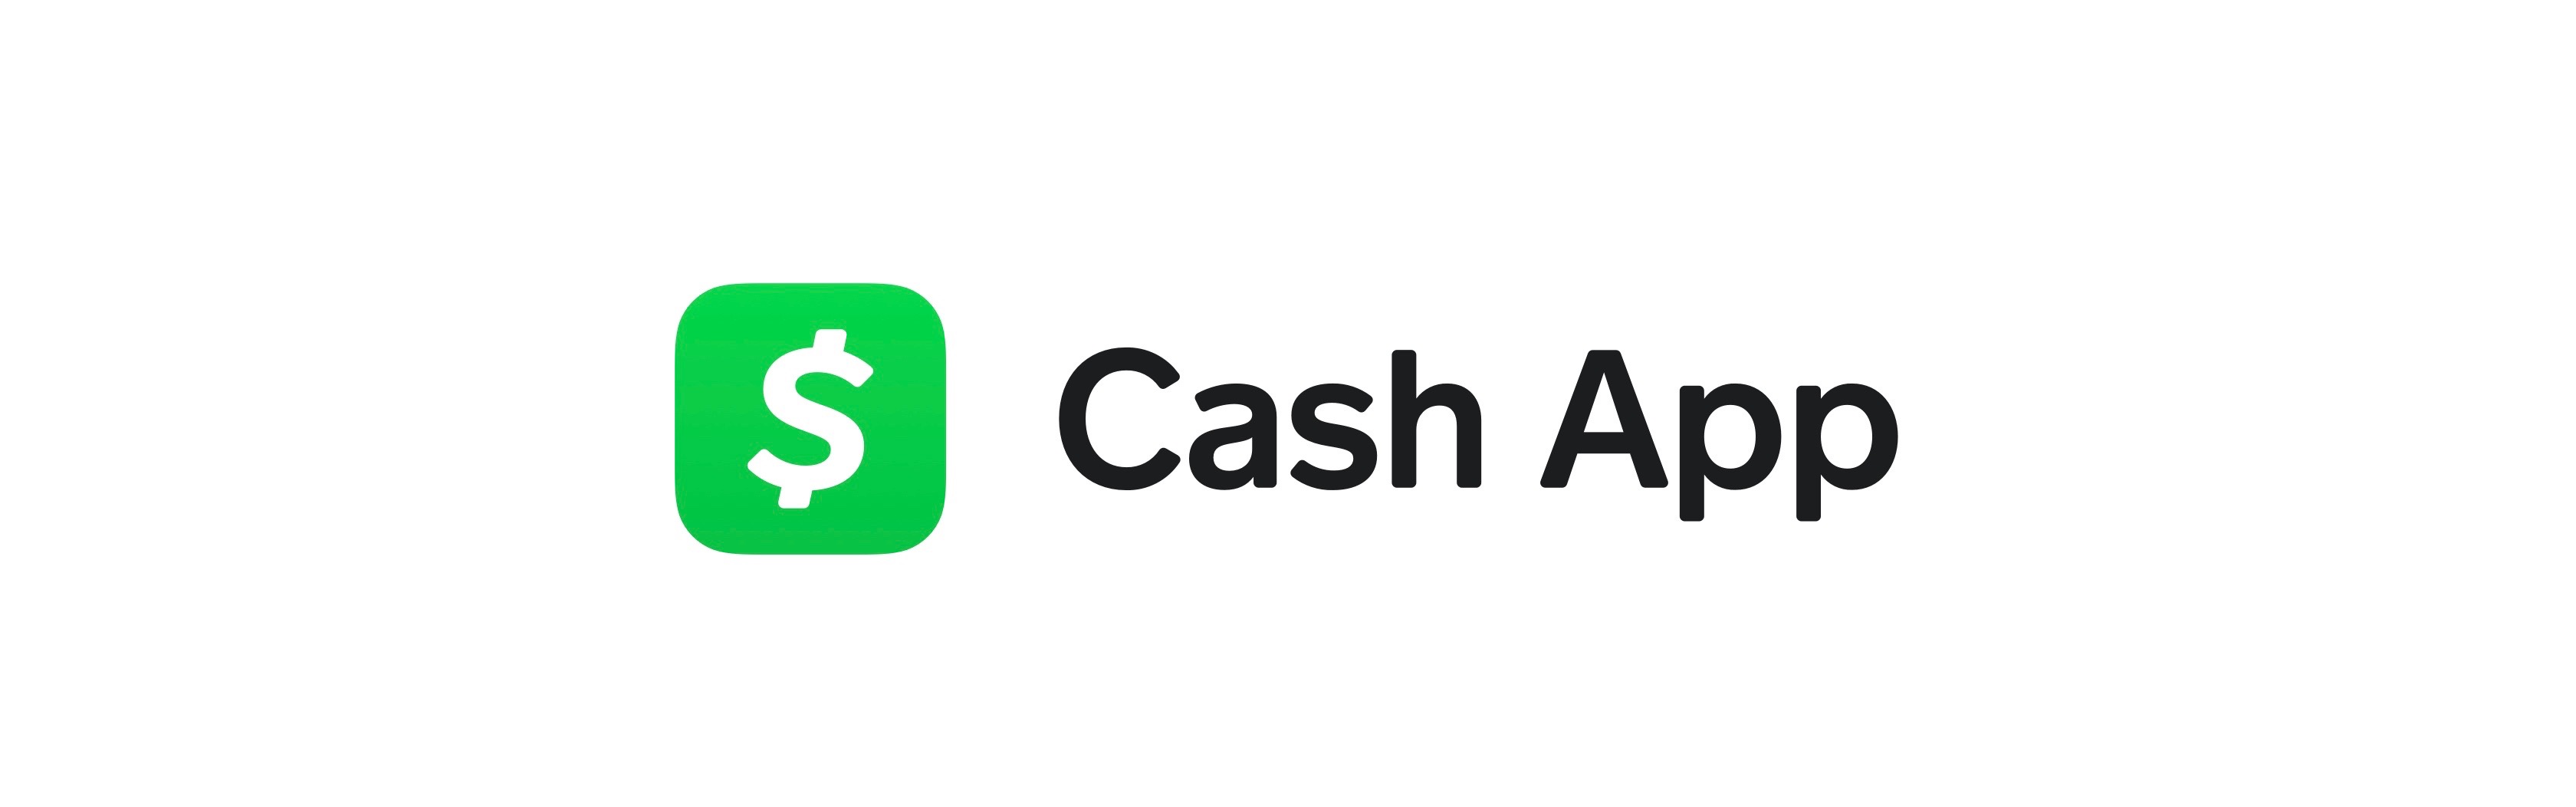 green dollar sign block logo with "Cash App" black text logo, offers bitcoin purchase function